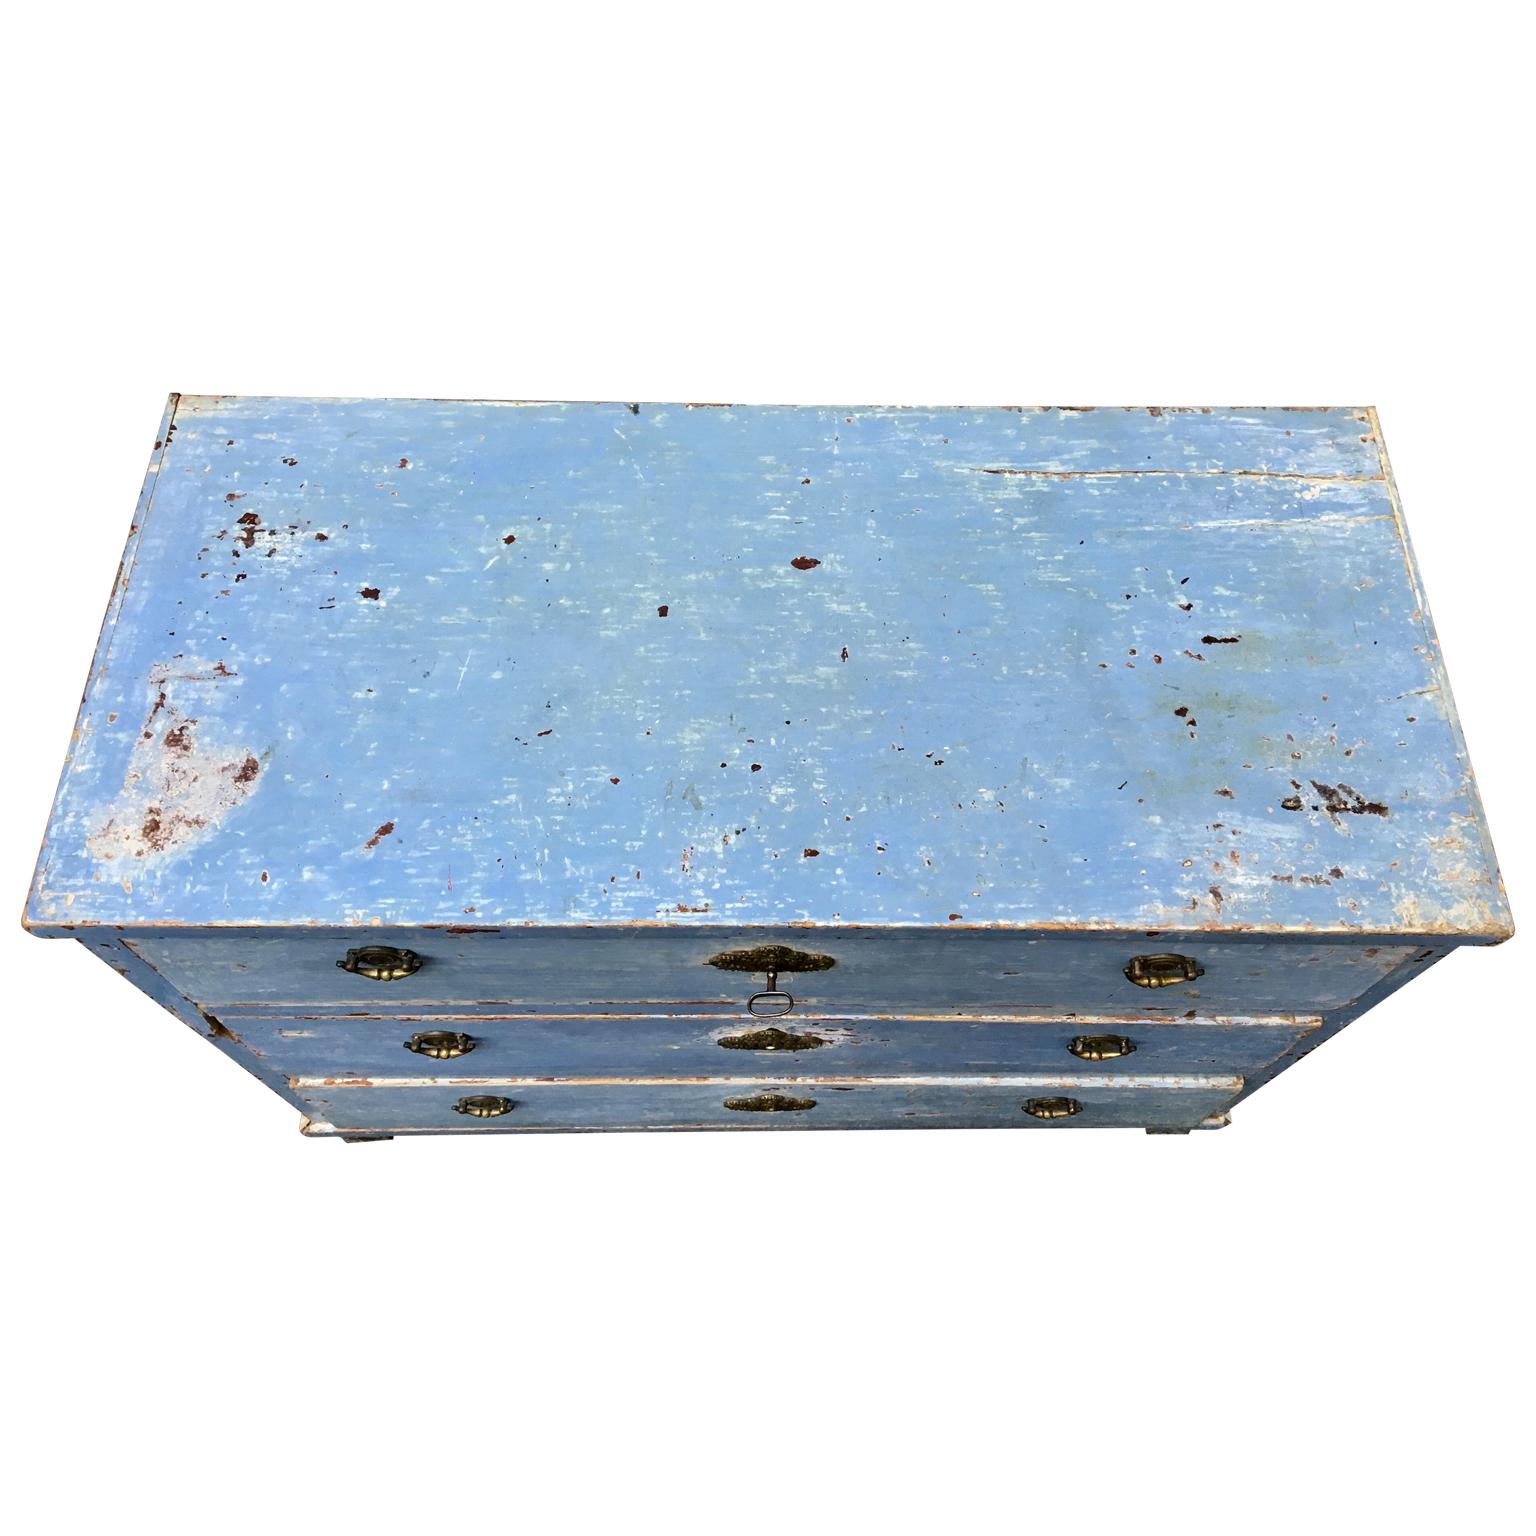 Painted Early 19th Century Swedish Chest of Drawers with Original Blue Scraped Paint